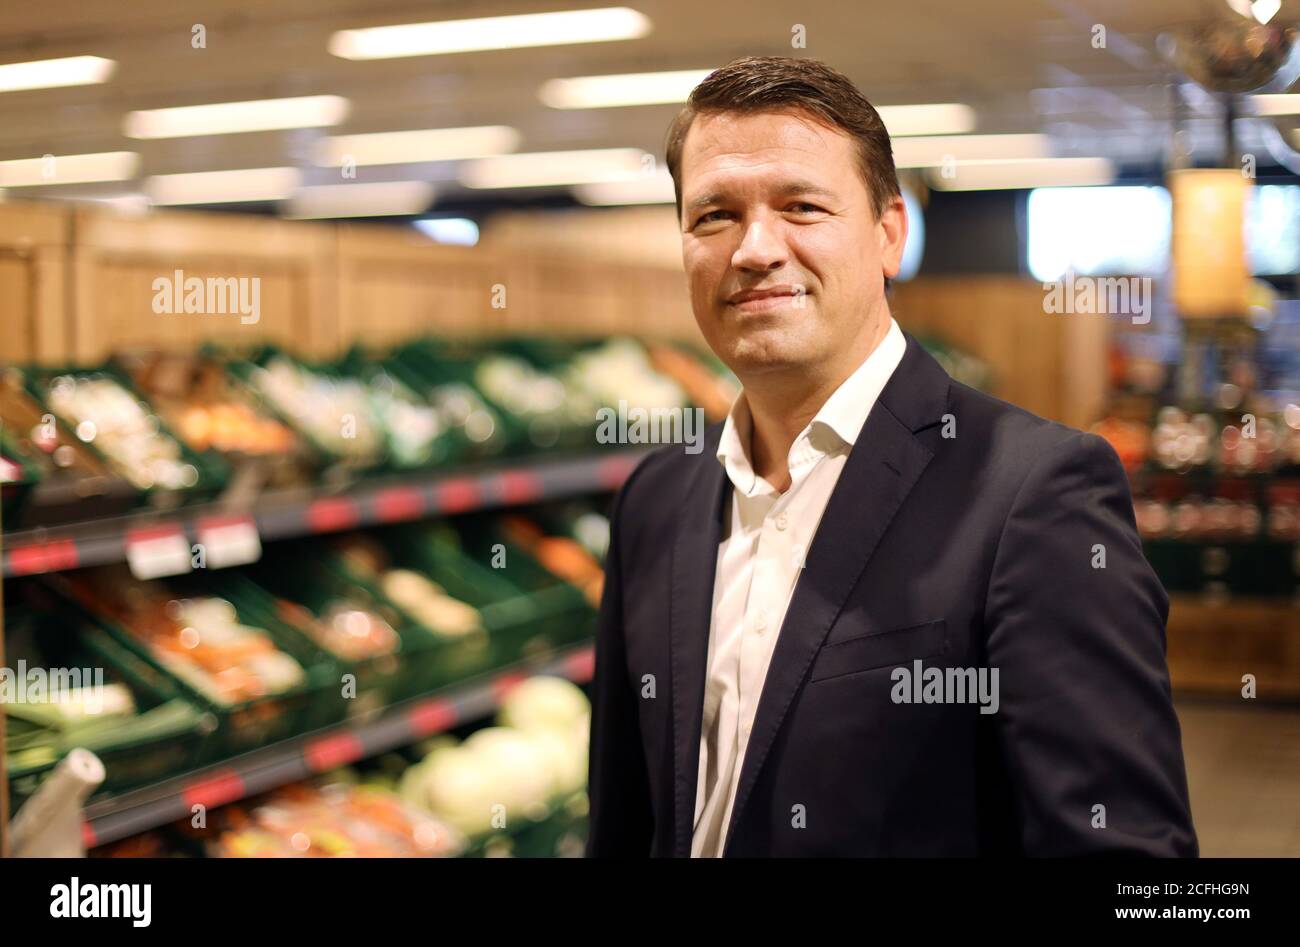 03 September 2020, Mecklenburg-Western Pomerania, Malchin: Managing Director Ingo Panknin of the retail chain Netto ApS & Co. KG stands in a Netto branch. The first branch opened 30 years ago in Vorpommern. In the meantime, the company is one of the largest in northeastern Germany with around 6000 employees. So far, the discounter has been represented 112 times in Mecklenburg-Western Pomerania alone, 143 times in Berlin and Brandenburg as well as in Saxony, Saxony-Anhalt, Lower Saxony, Hamburg and Schleswig-Holstein. (to dpa 'Only MV retail chain wants to grow - Corona crisis brings plus') Pho Stock Photo